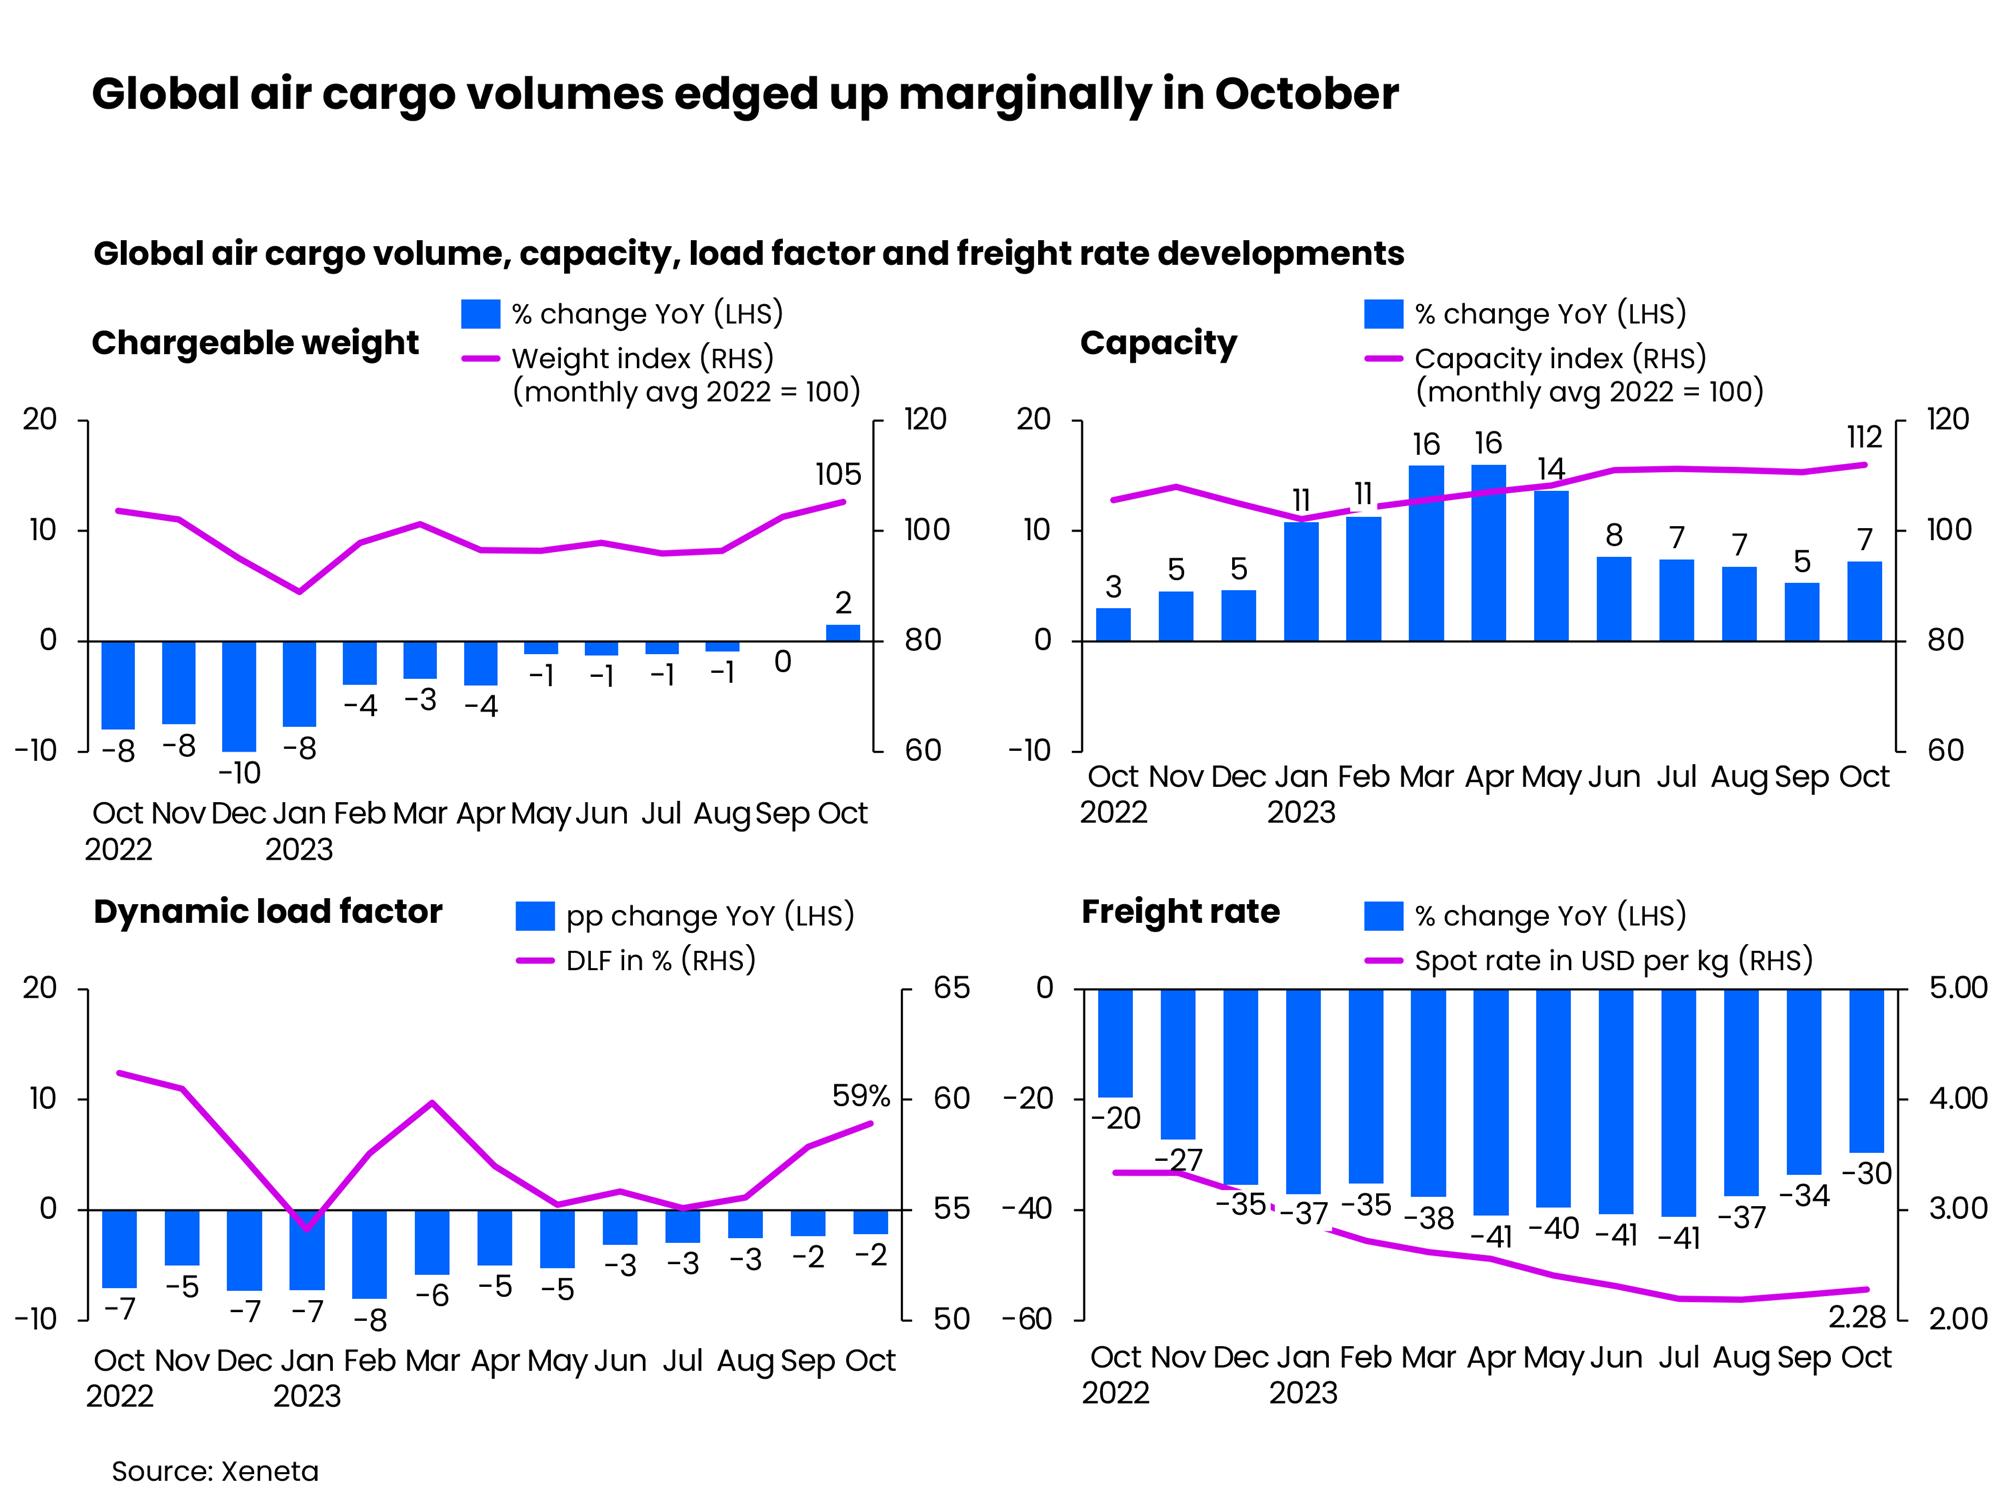 Self Photos / Files - Global air cargo demand edged up globally in October